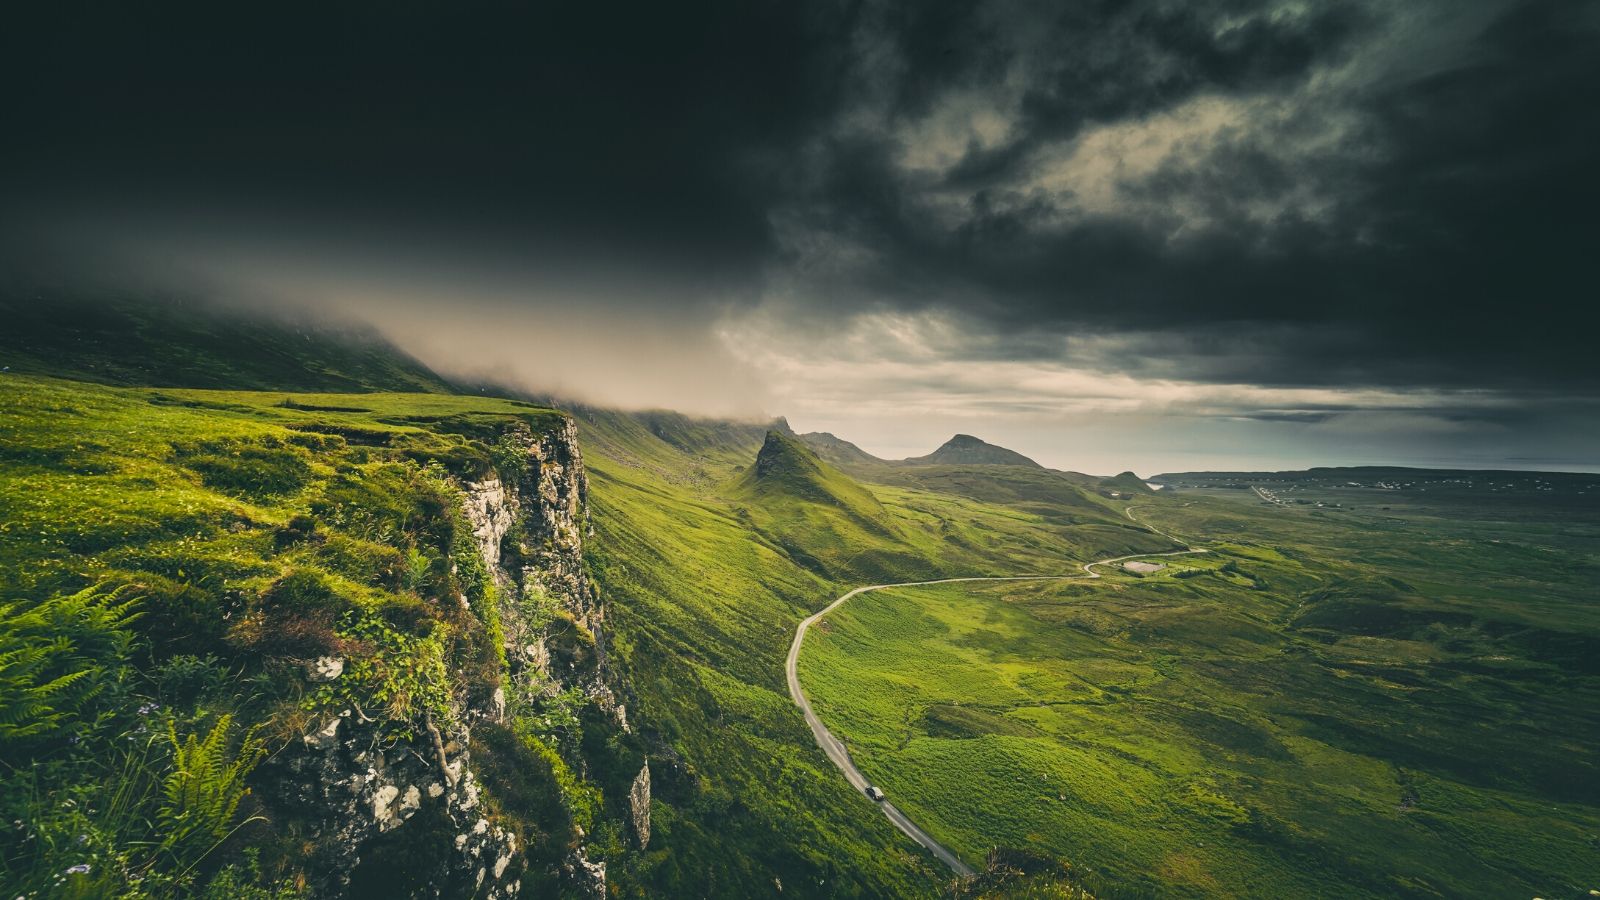 A dark and moody image of the Scottish Highlands